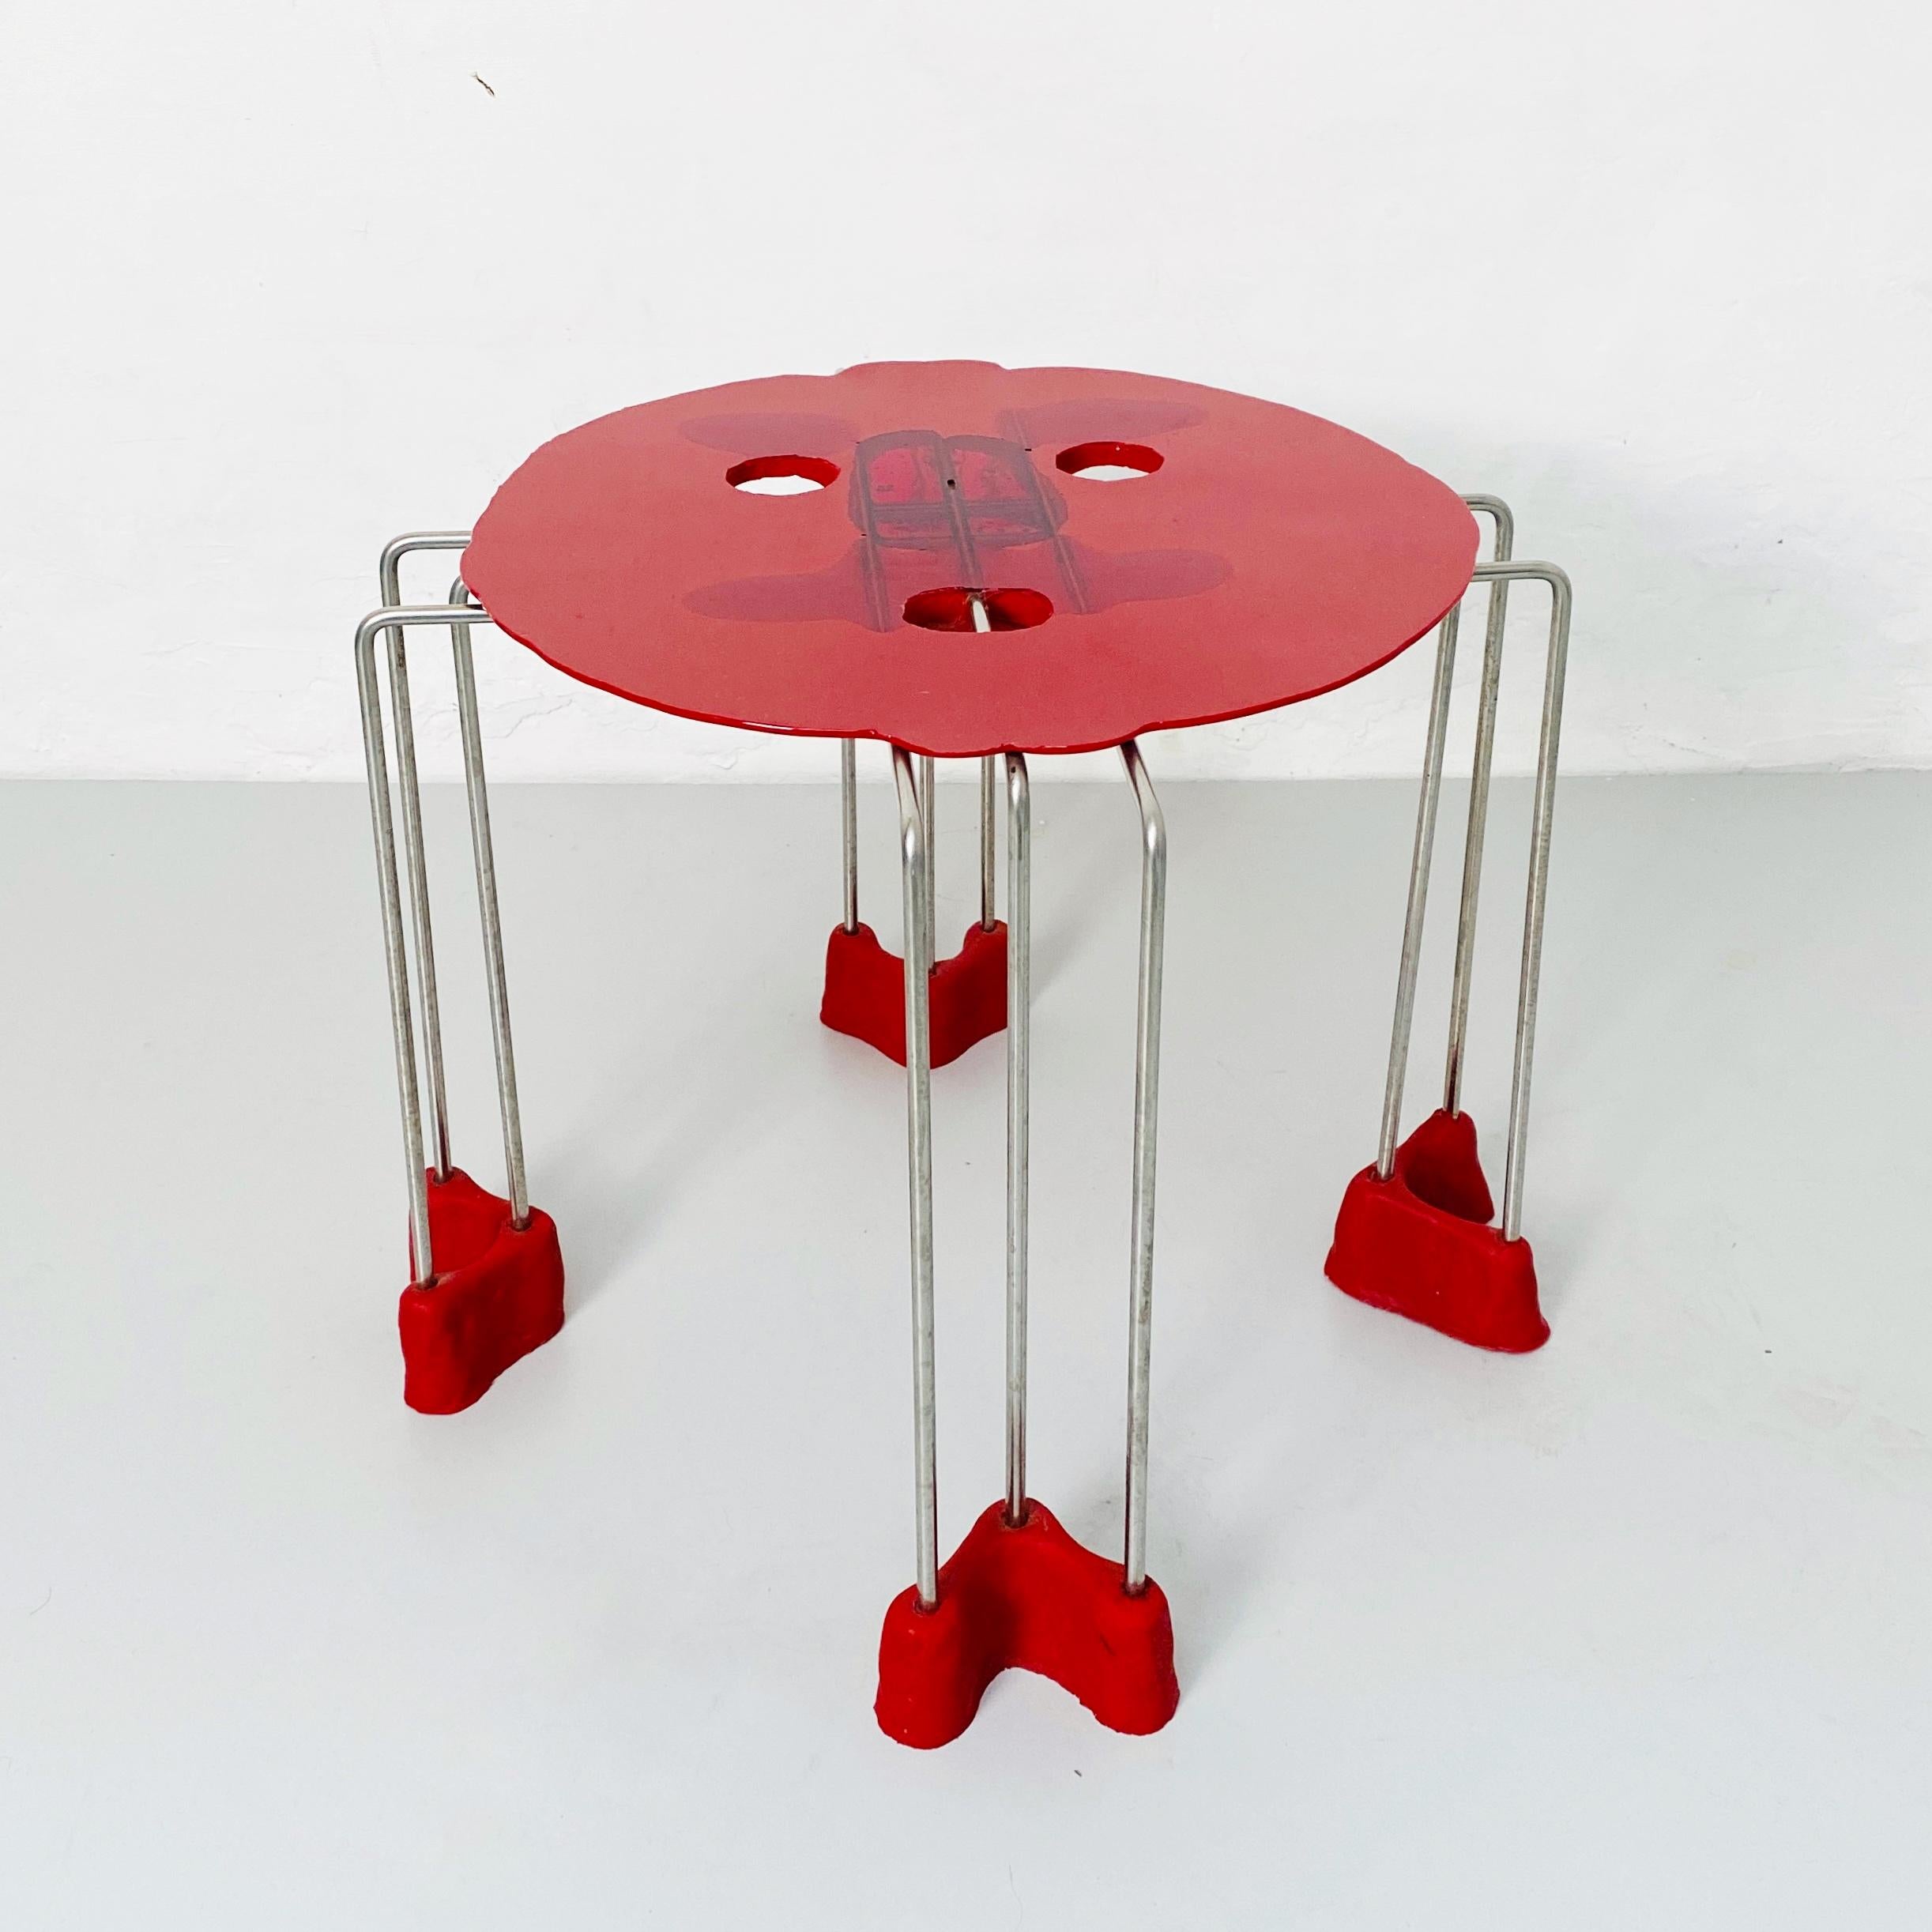 Triple Play Resin Stool by Gaetano Pesce for Fish Design, 2000s
Stool with rigid resin top in red, stainless steel structure and flexible resin feet. 
Beautiful and perfect as side table, coffee table and night table 
Made by Fish Design and